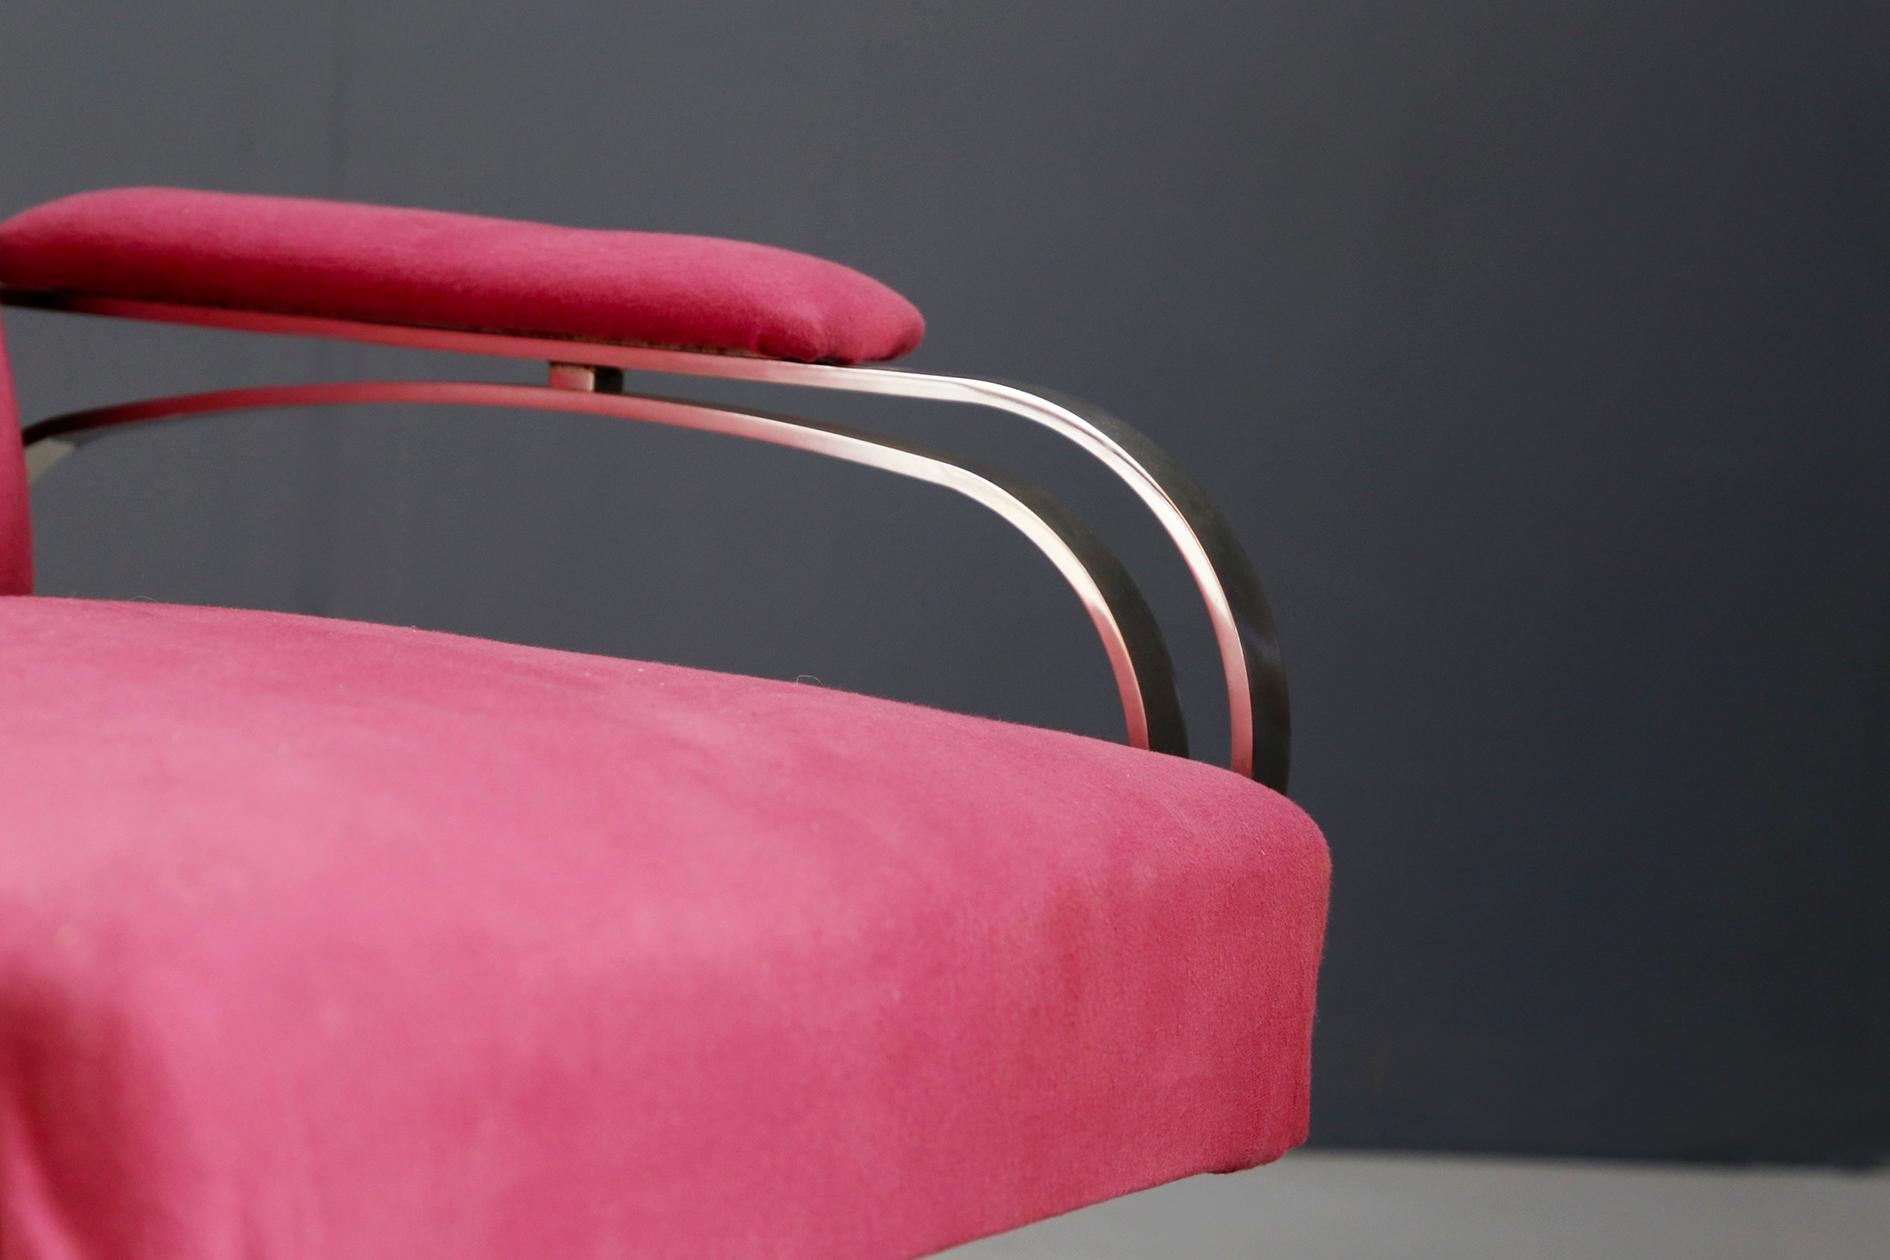 Pair of armchairs model Micaela designed by Gianni Moscatelli for Formanova manufacture in 1970s.
The pair of armchairs is with the original fabric in perfect condition. The fabric is a fuchsia velvet. The steel frame is in excellent condition with